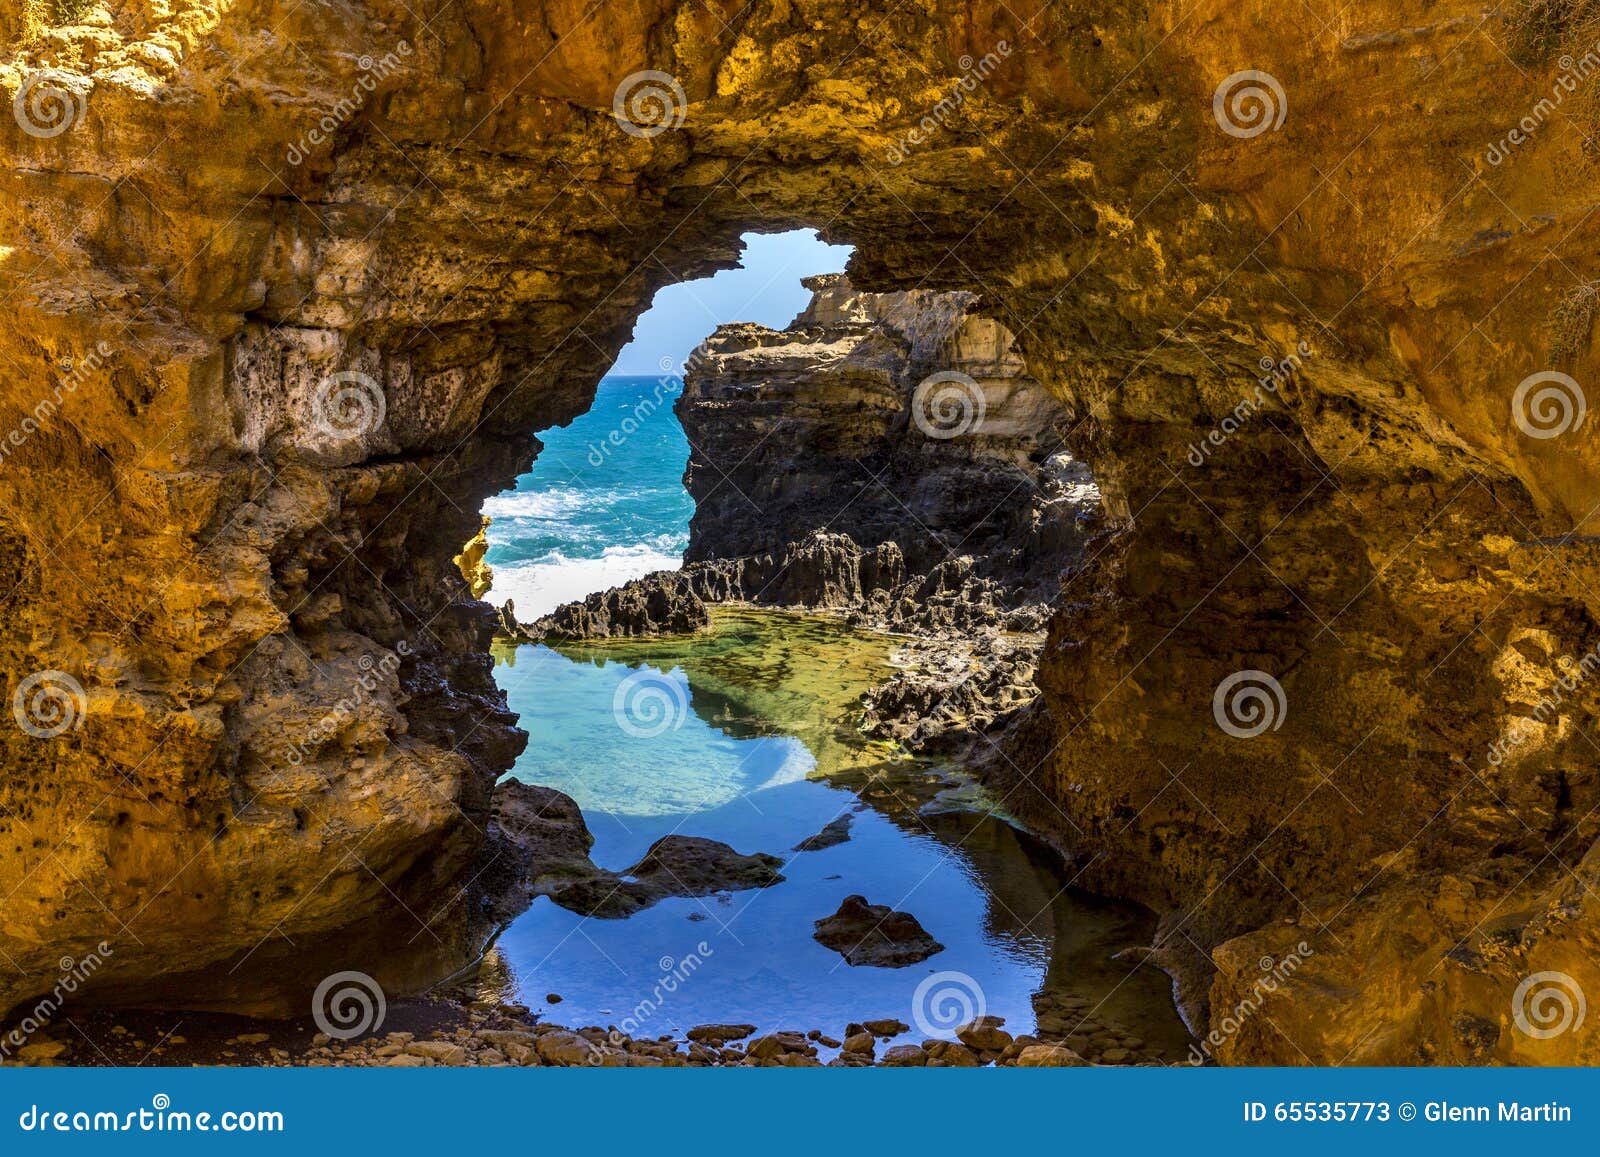 the grotto on the great ocean road